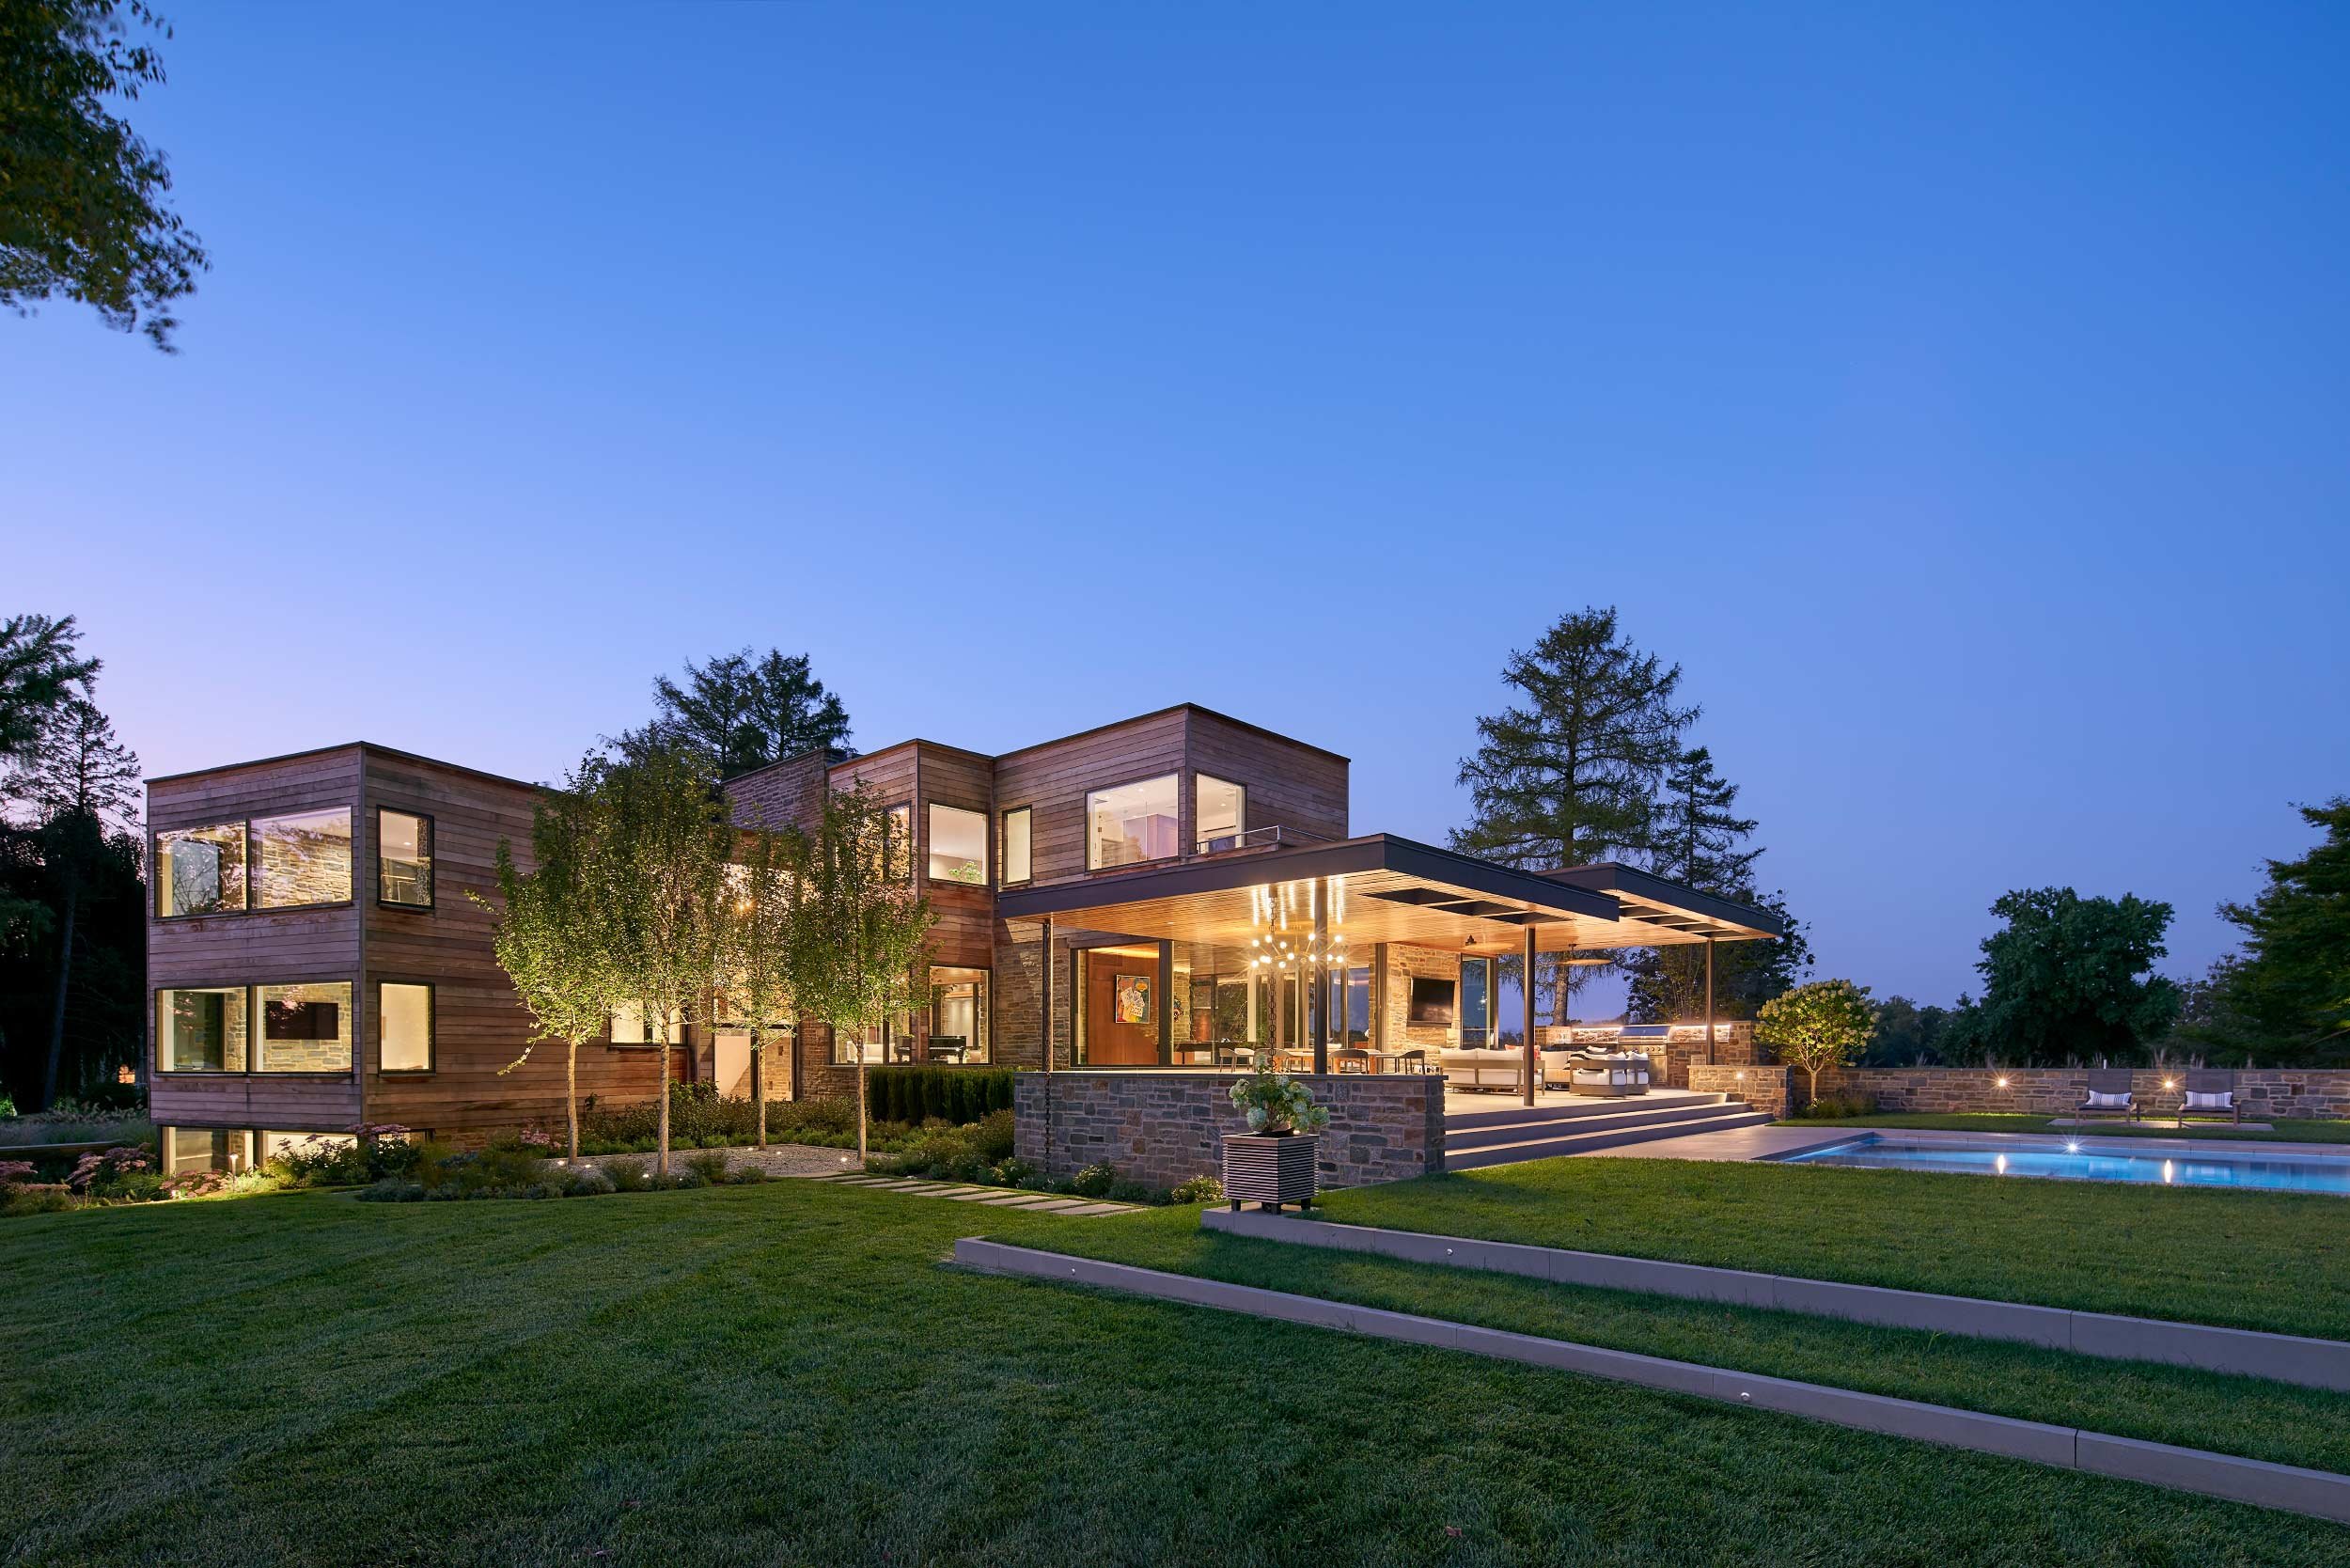  Private Residence Newtown Square, PA kYODER Design 